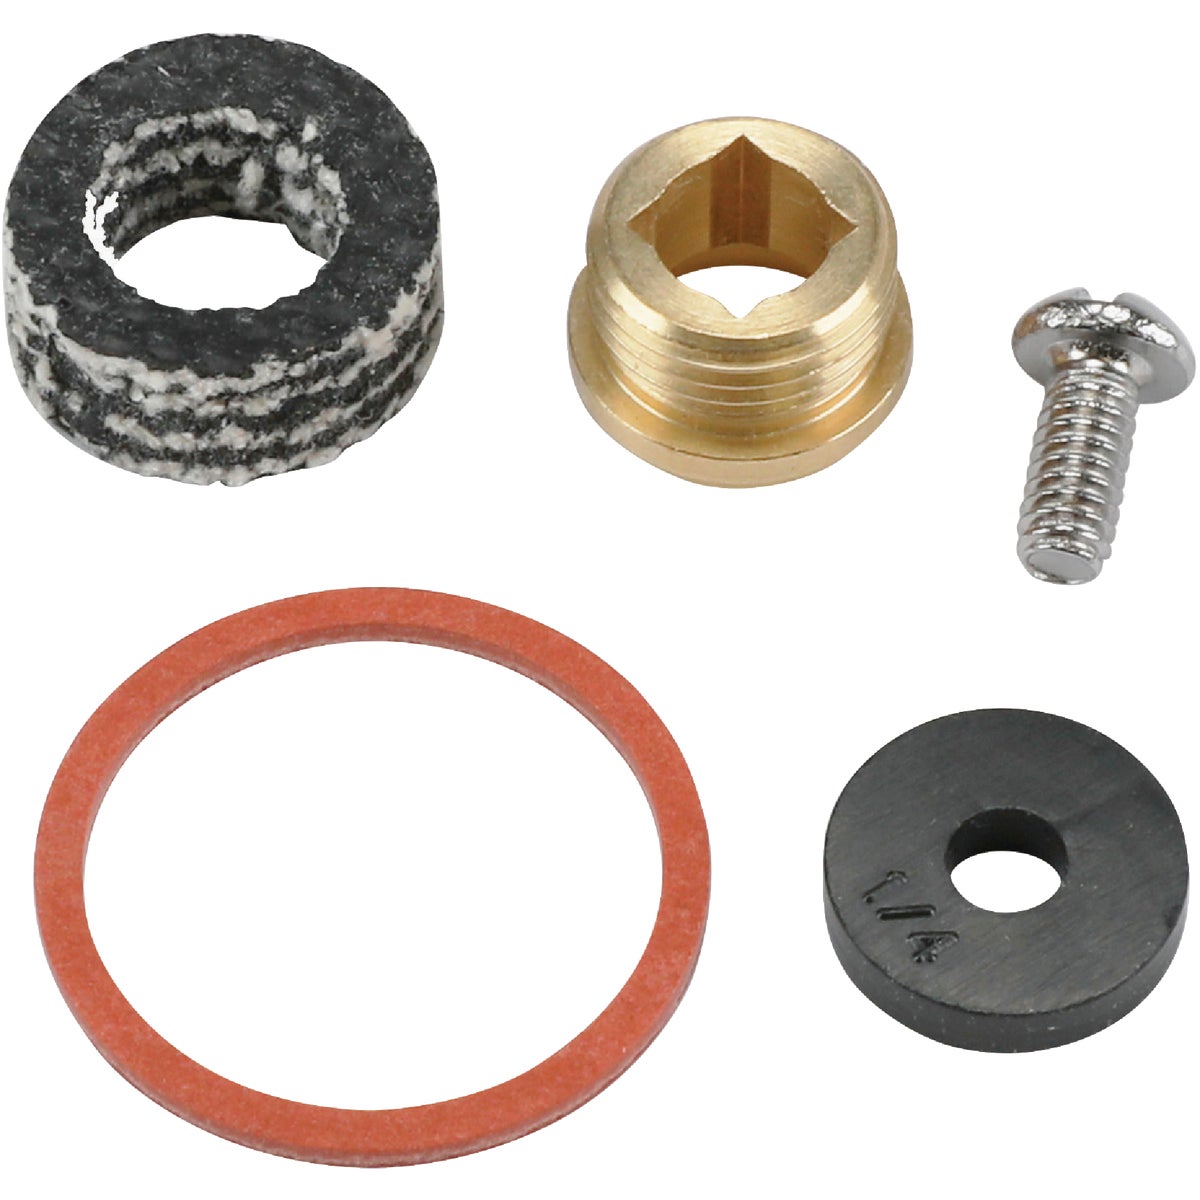 Item 420388, Stem faucet repair kit for Sterling lavatory and kitchen.